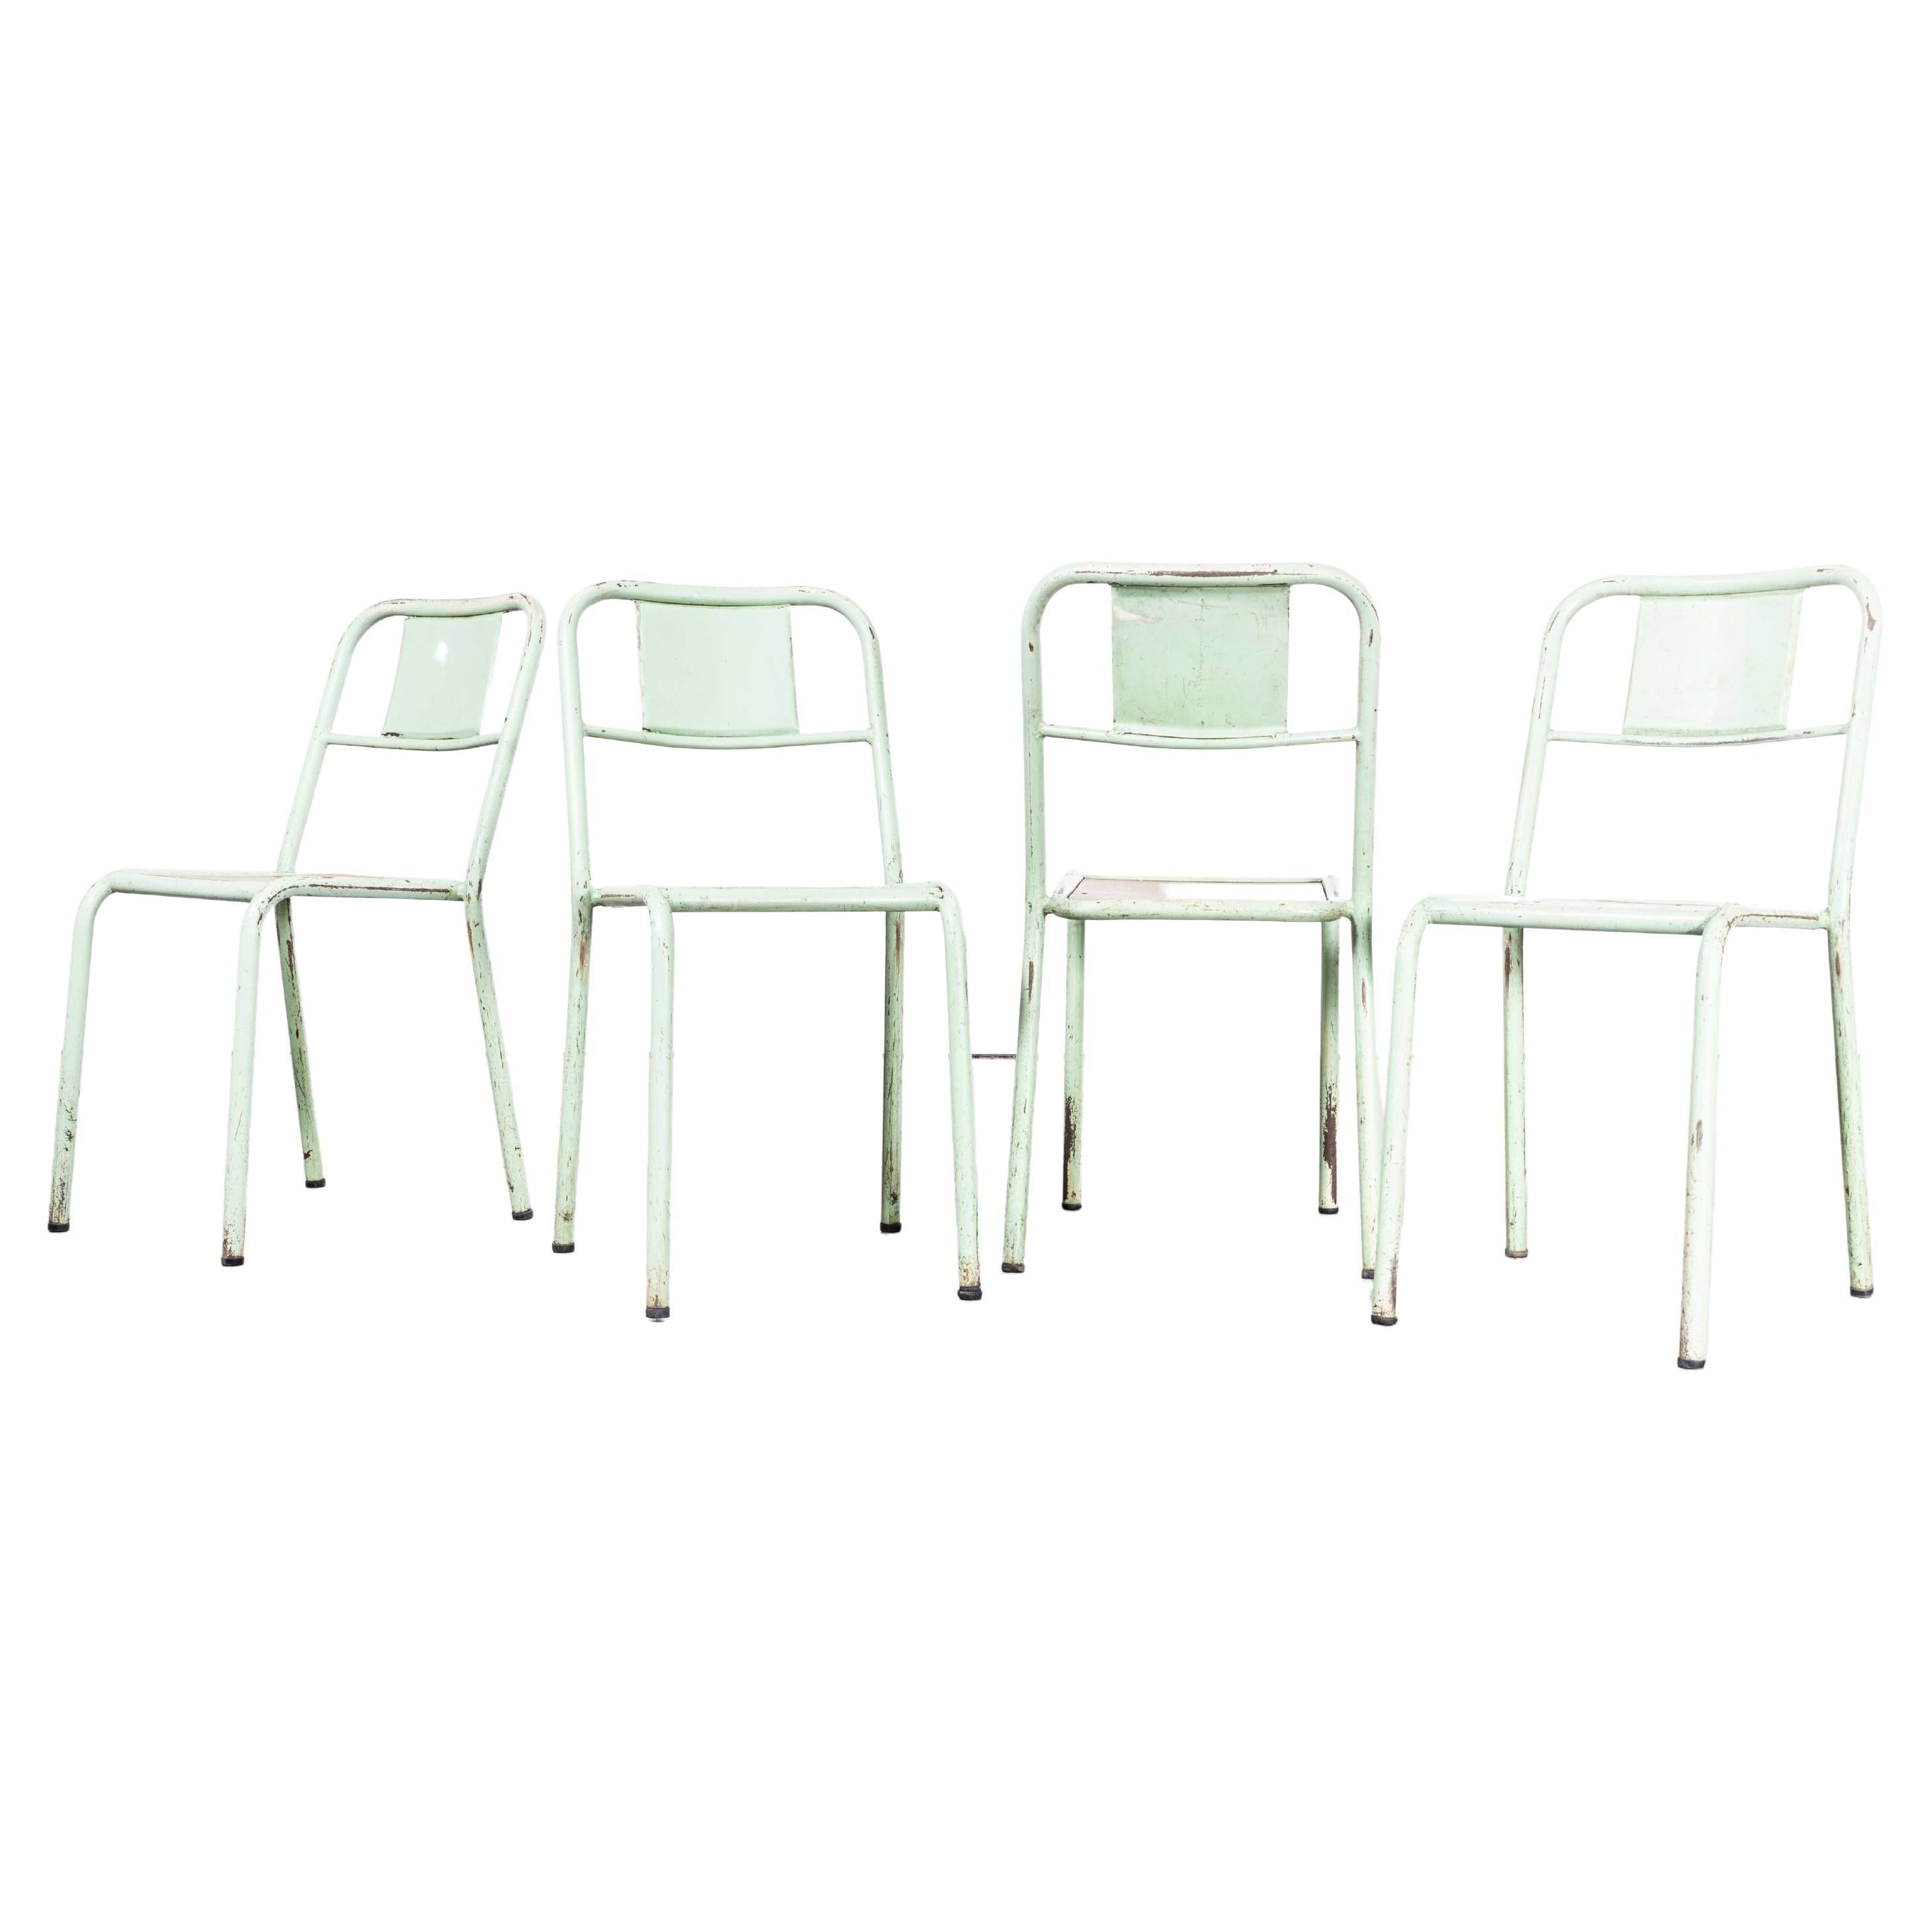 1950's French Mullca Stacking Dining Chairs Mint With Wood Seat - Set Of Four For Sale